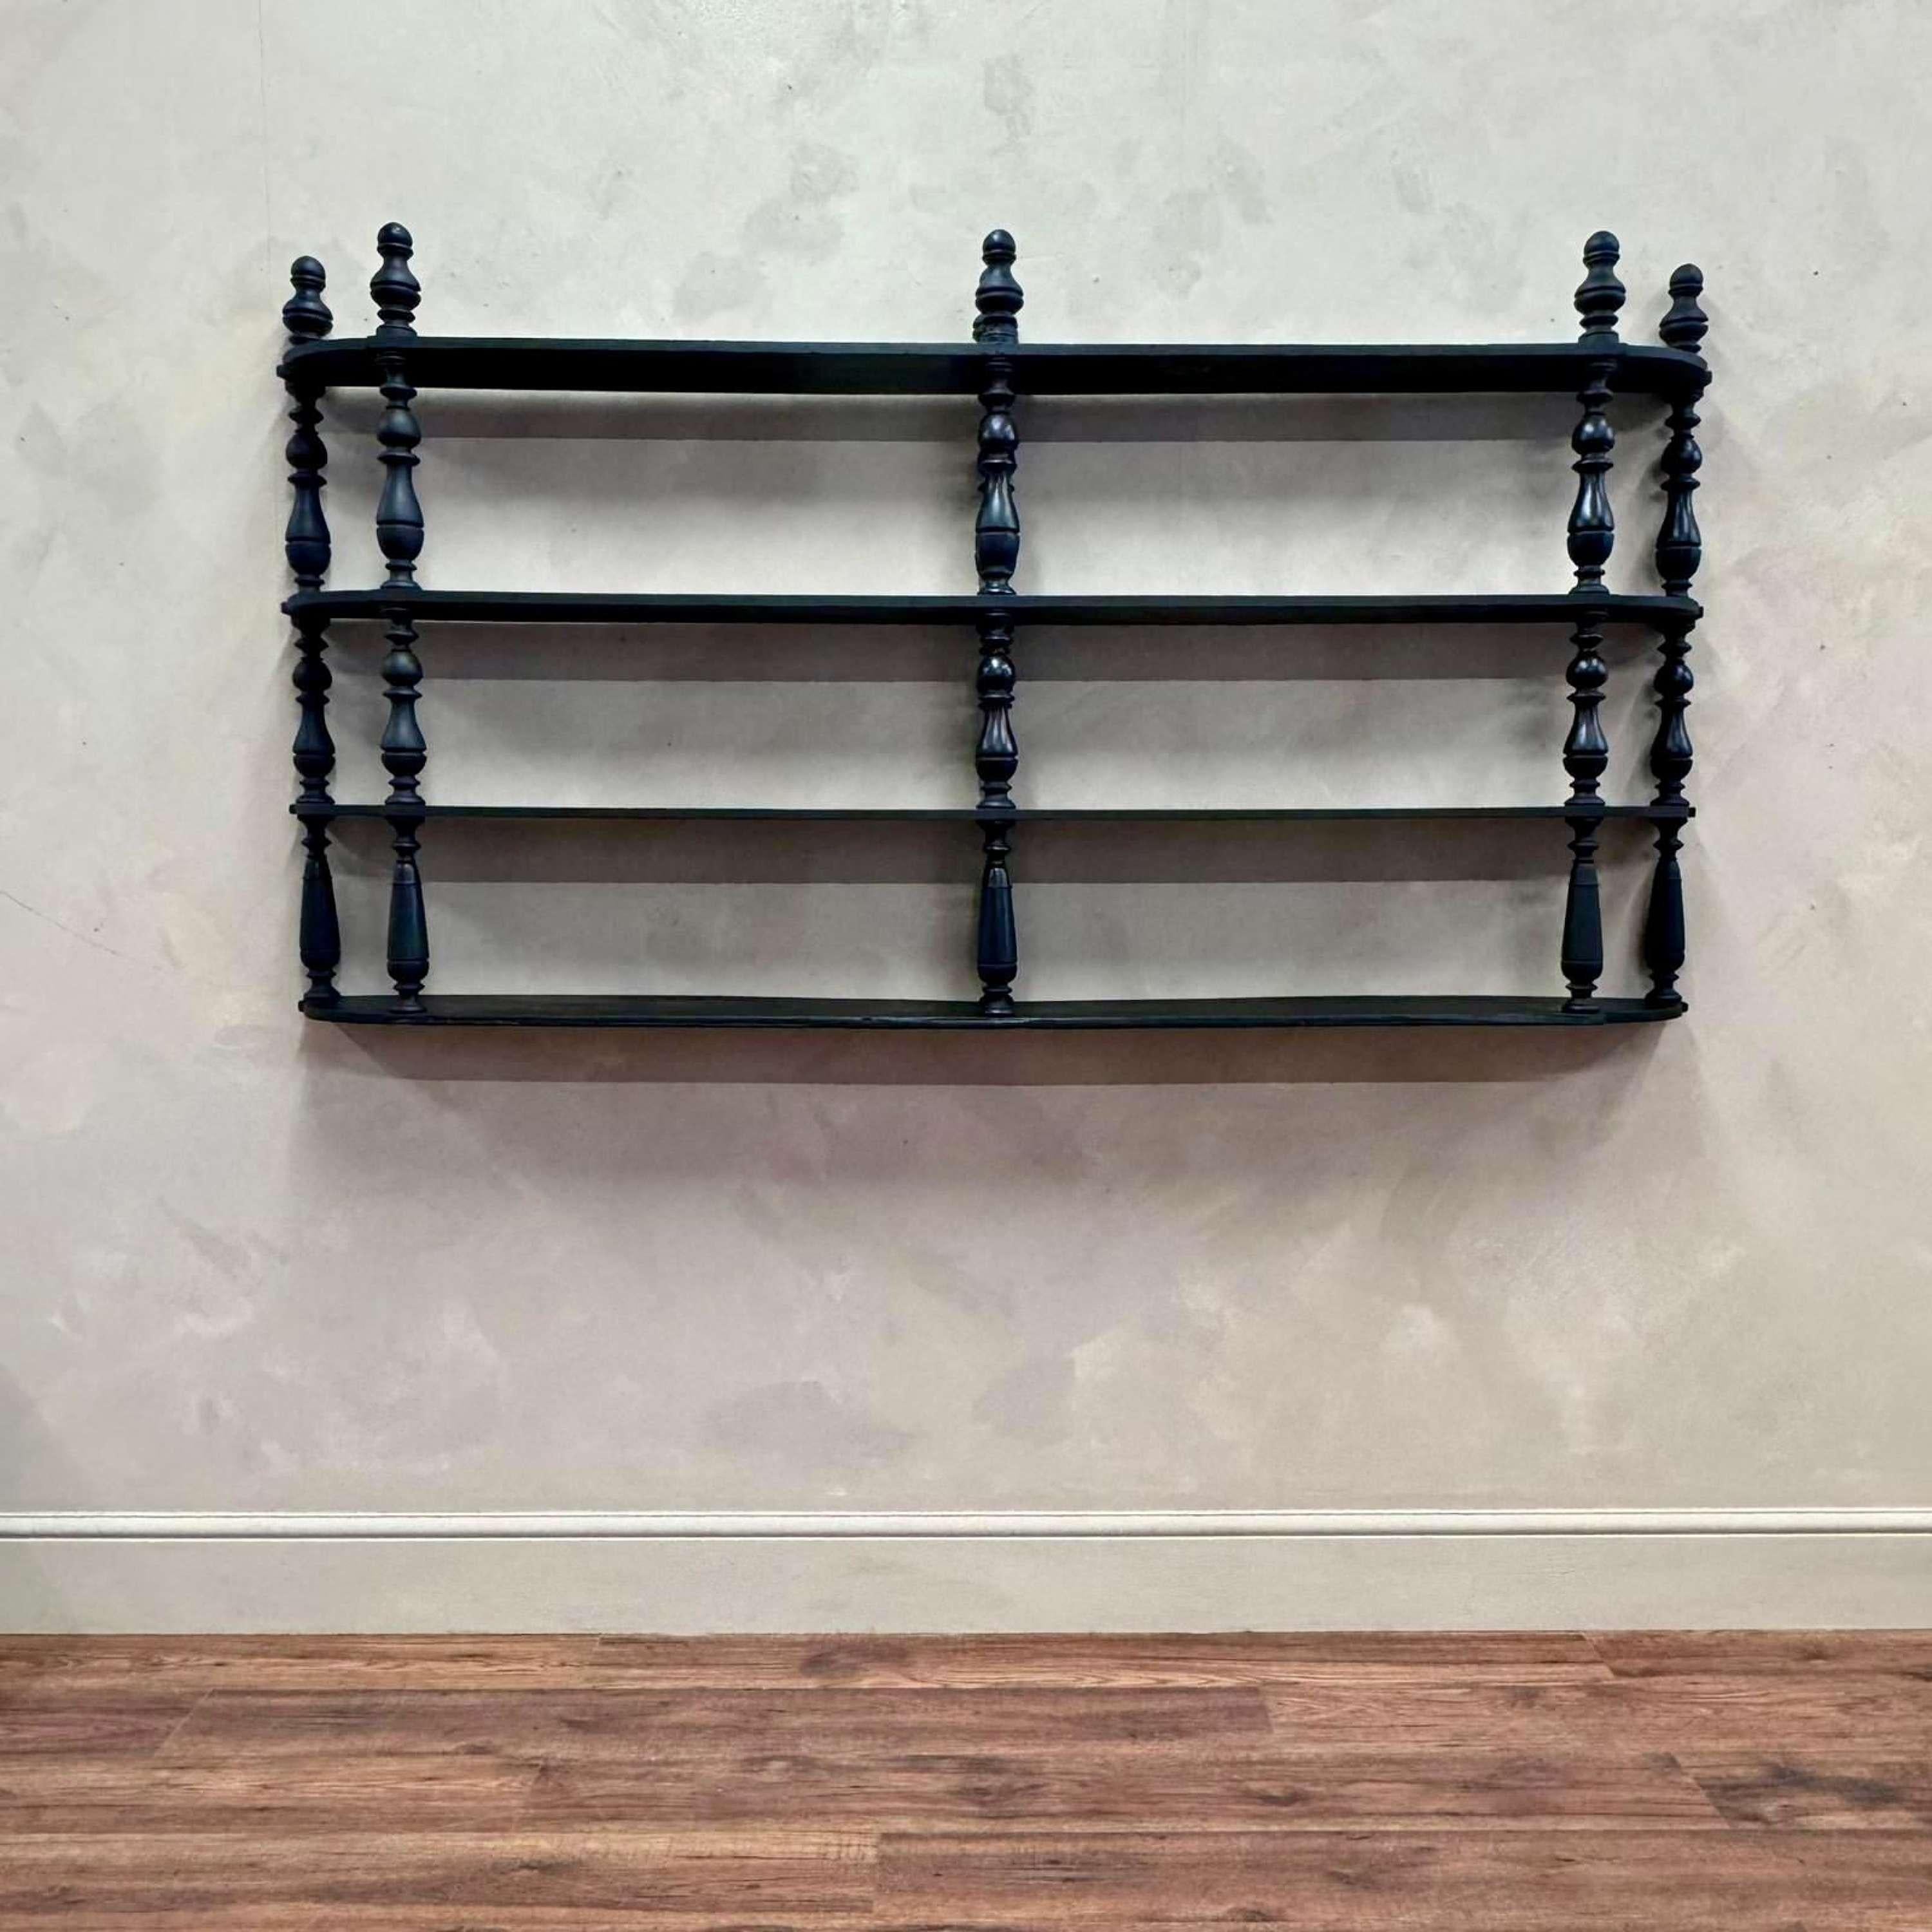 Large scale, French ebonised bobbin display shelves.
Usual wear commensurate with age (fully treated.)
France, circa 1920.

Length - 188.5 cm
Height - 99.5 cm
Depth - 19.5 cm